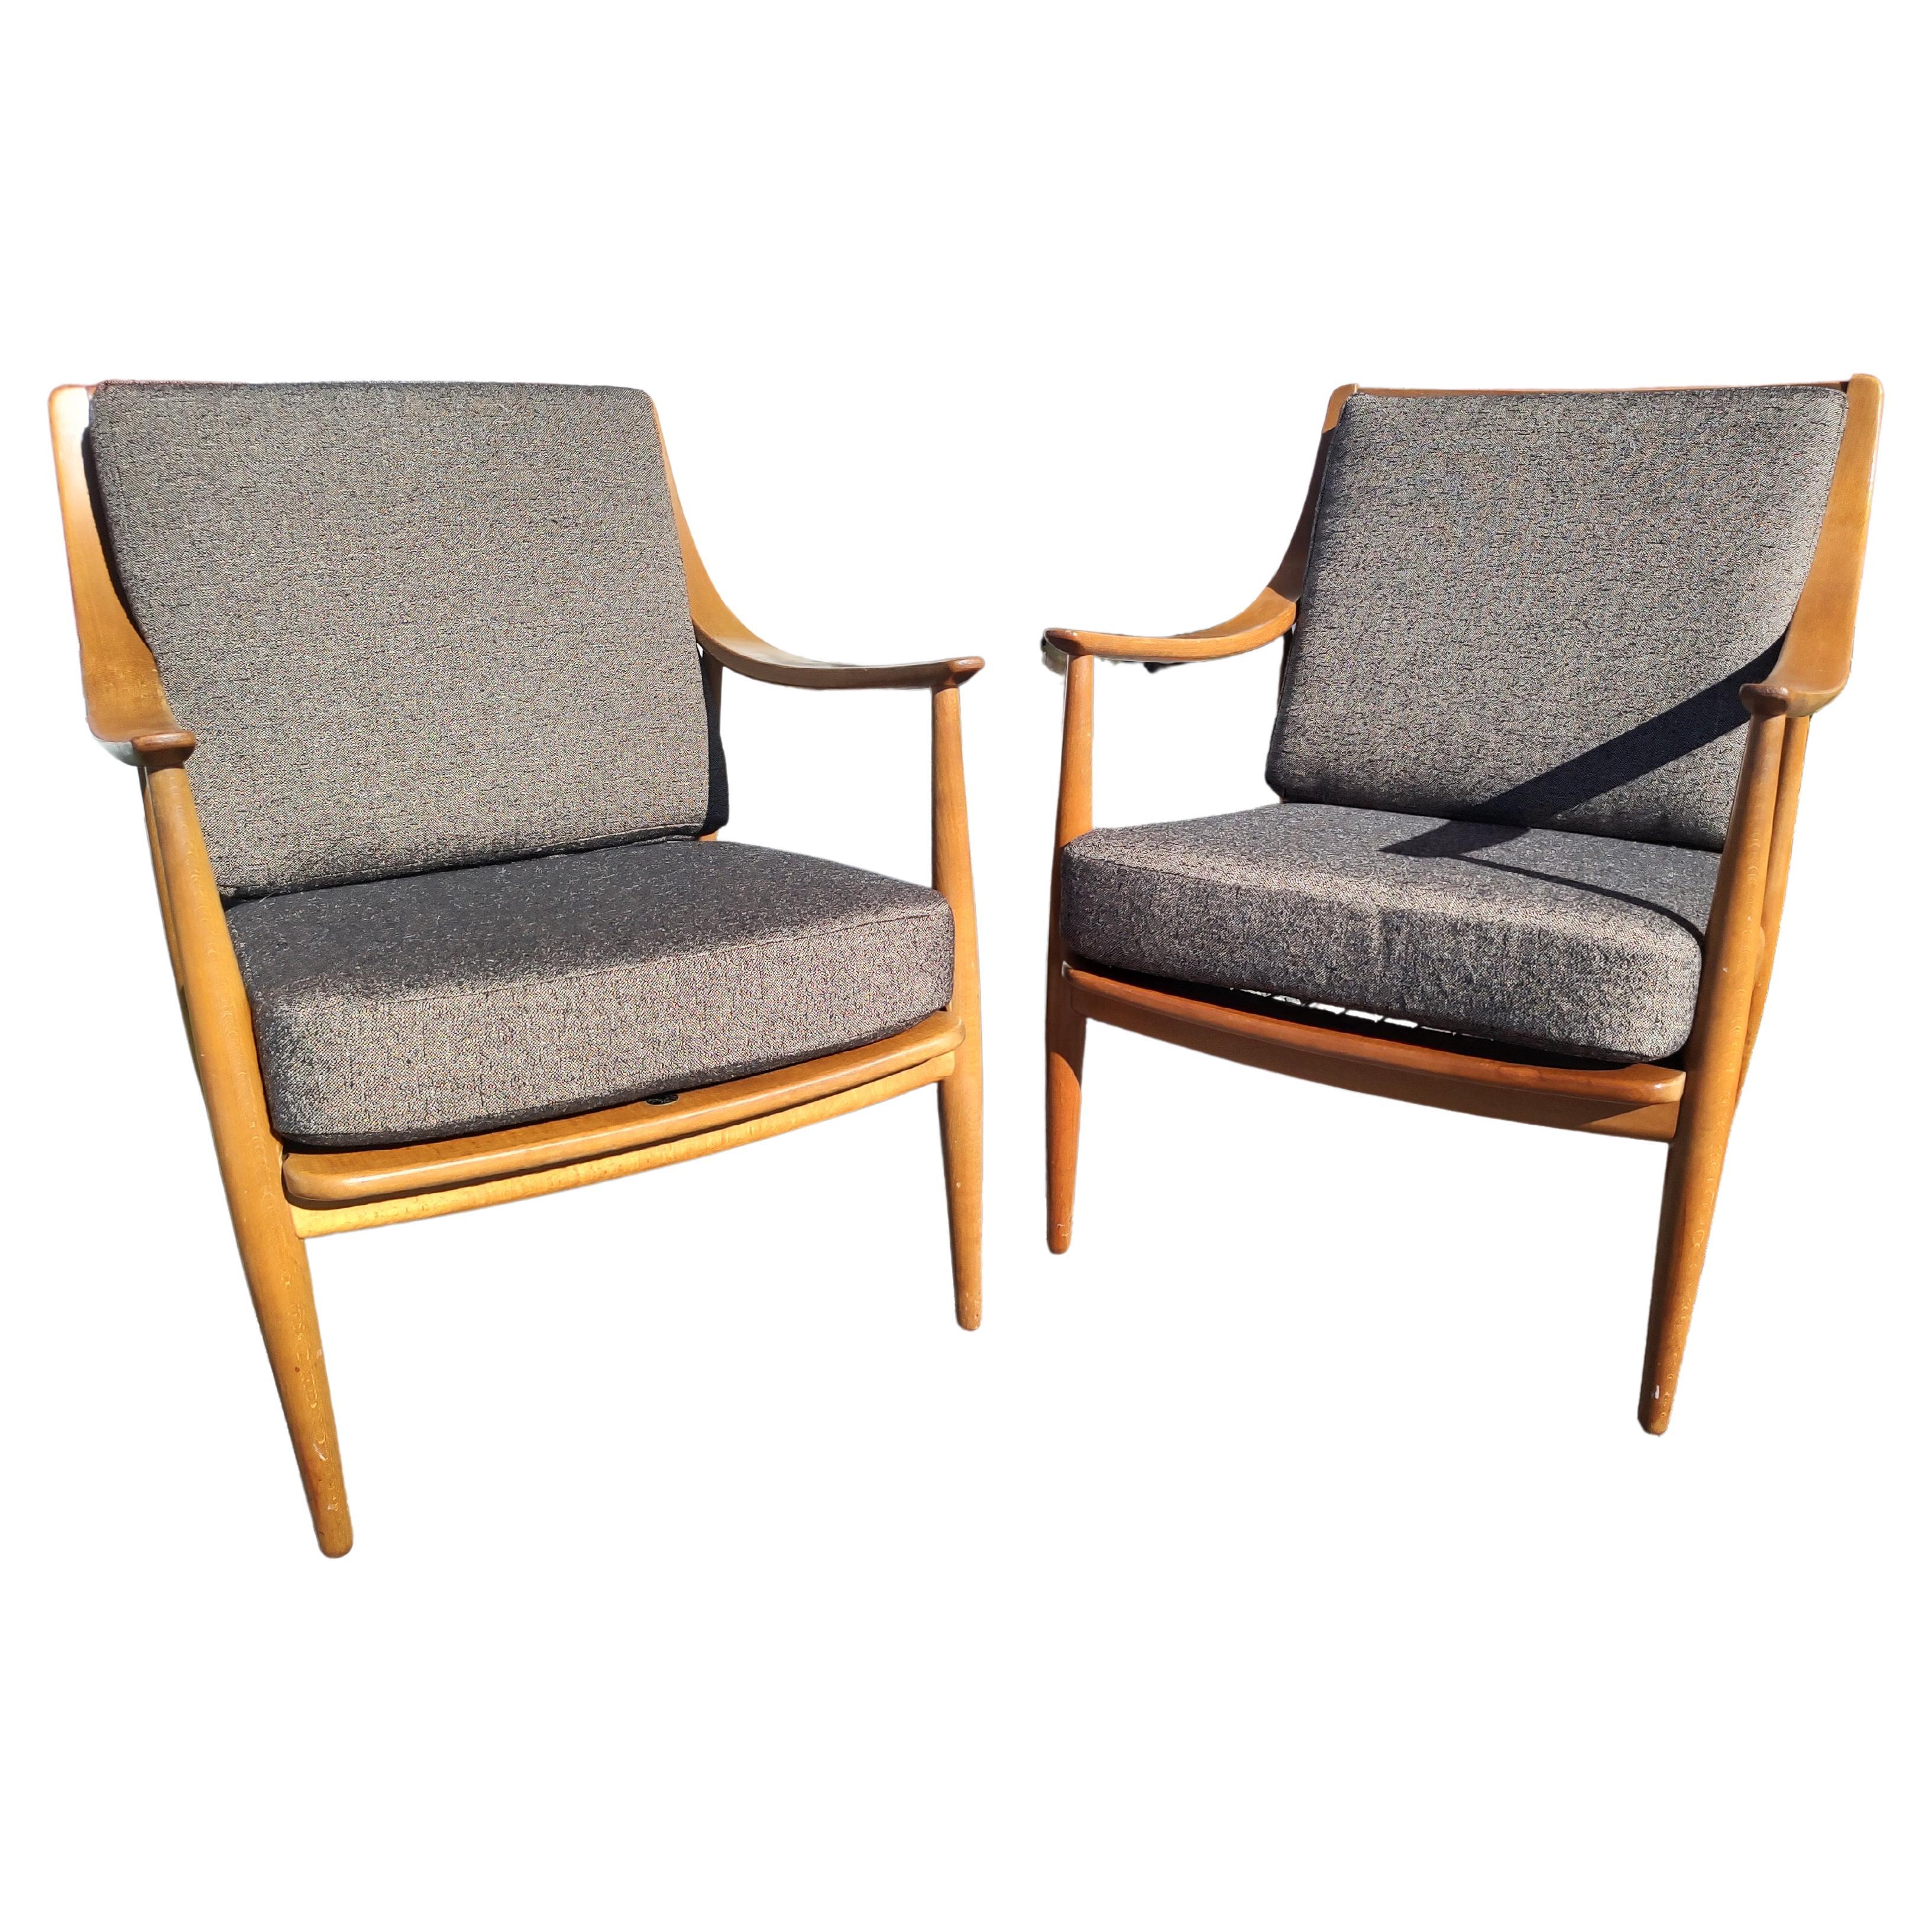 Beautiful pair of Mid-Century Modern sculptural Scandinavian designed chairs by Peter Hvidt and Olga Molgaard Neilson for John Stuart Inc. Created out of walnut with sloping curved arms and spindle backs. Brand new upholstery gives a great look and